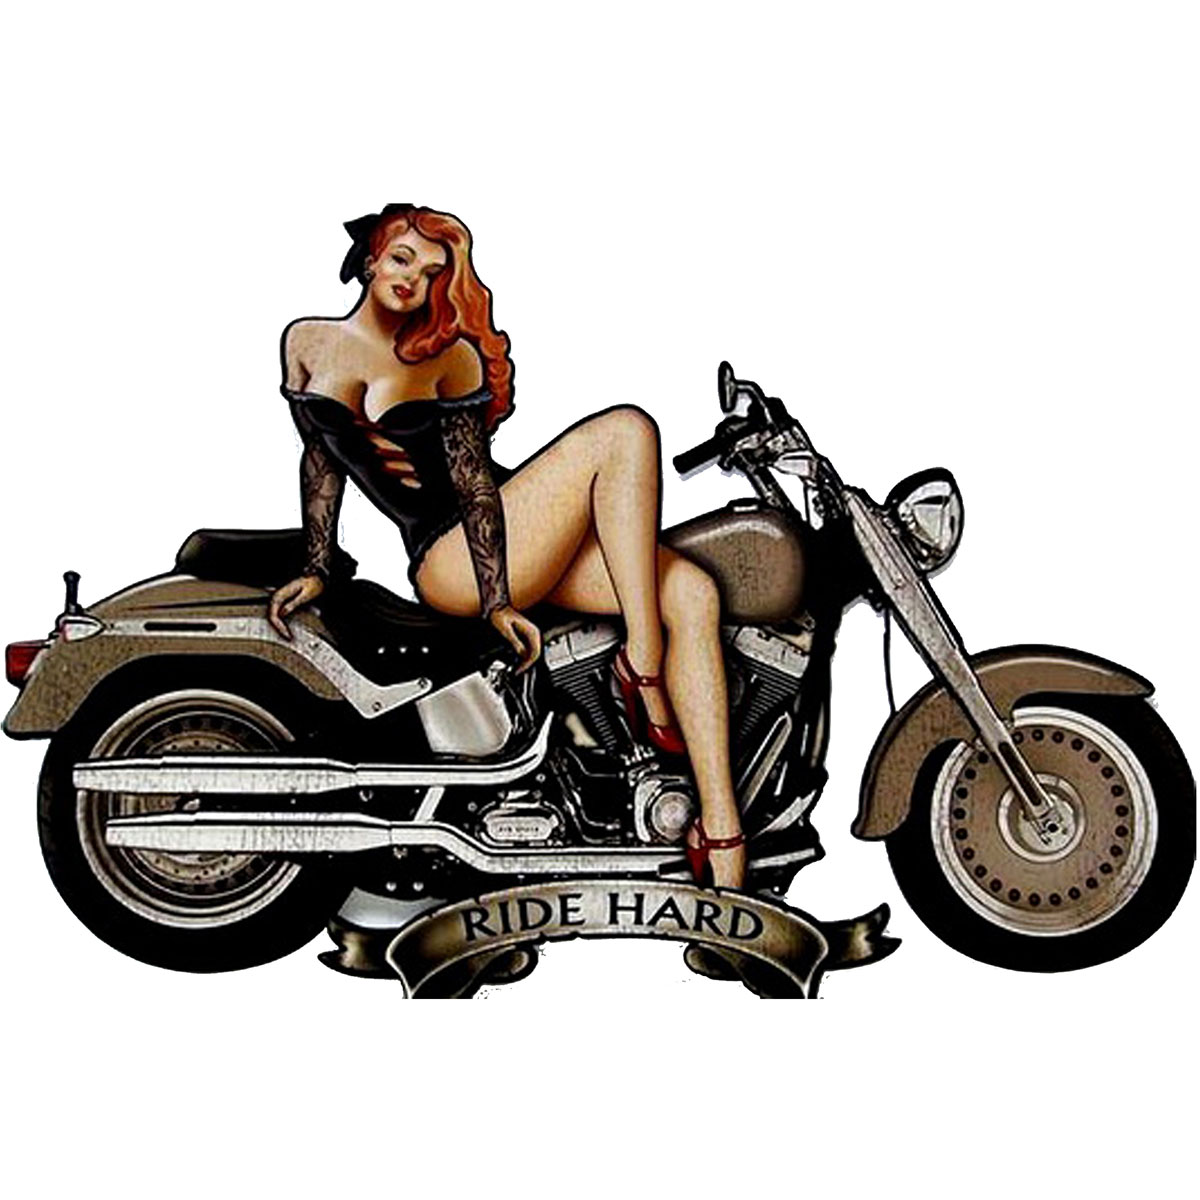 Plaque pin up ride hard